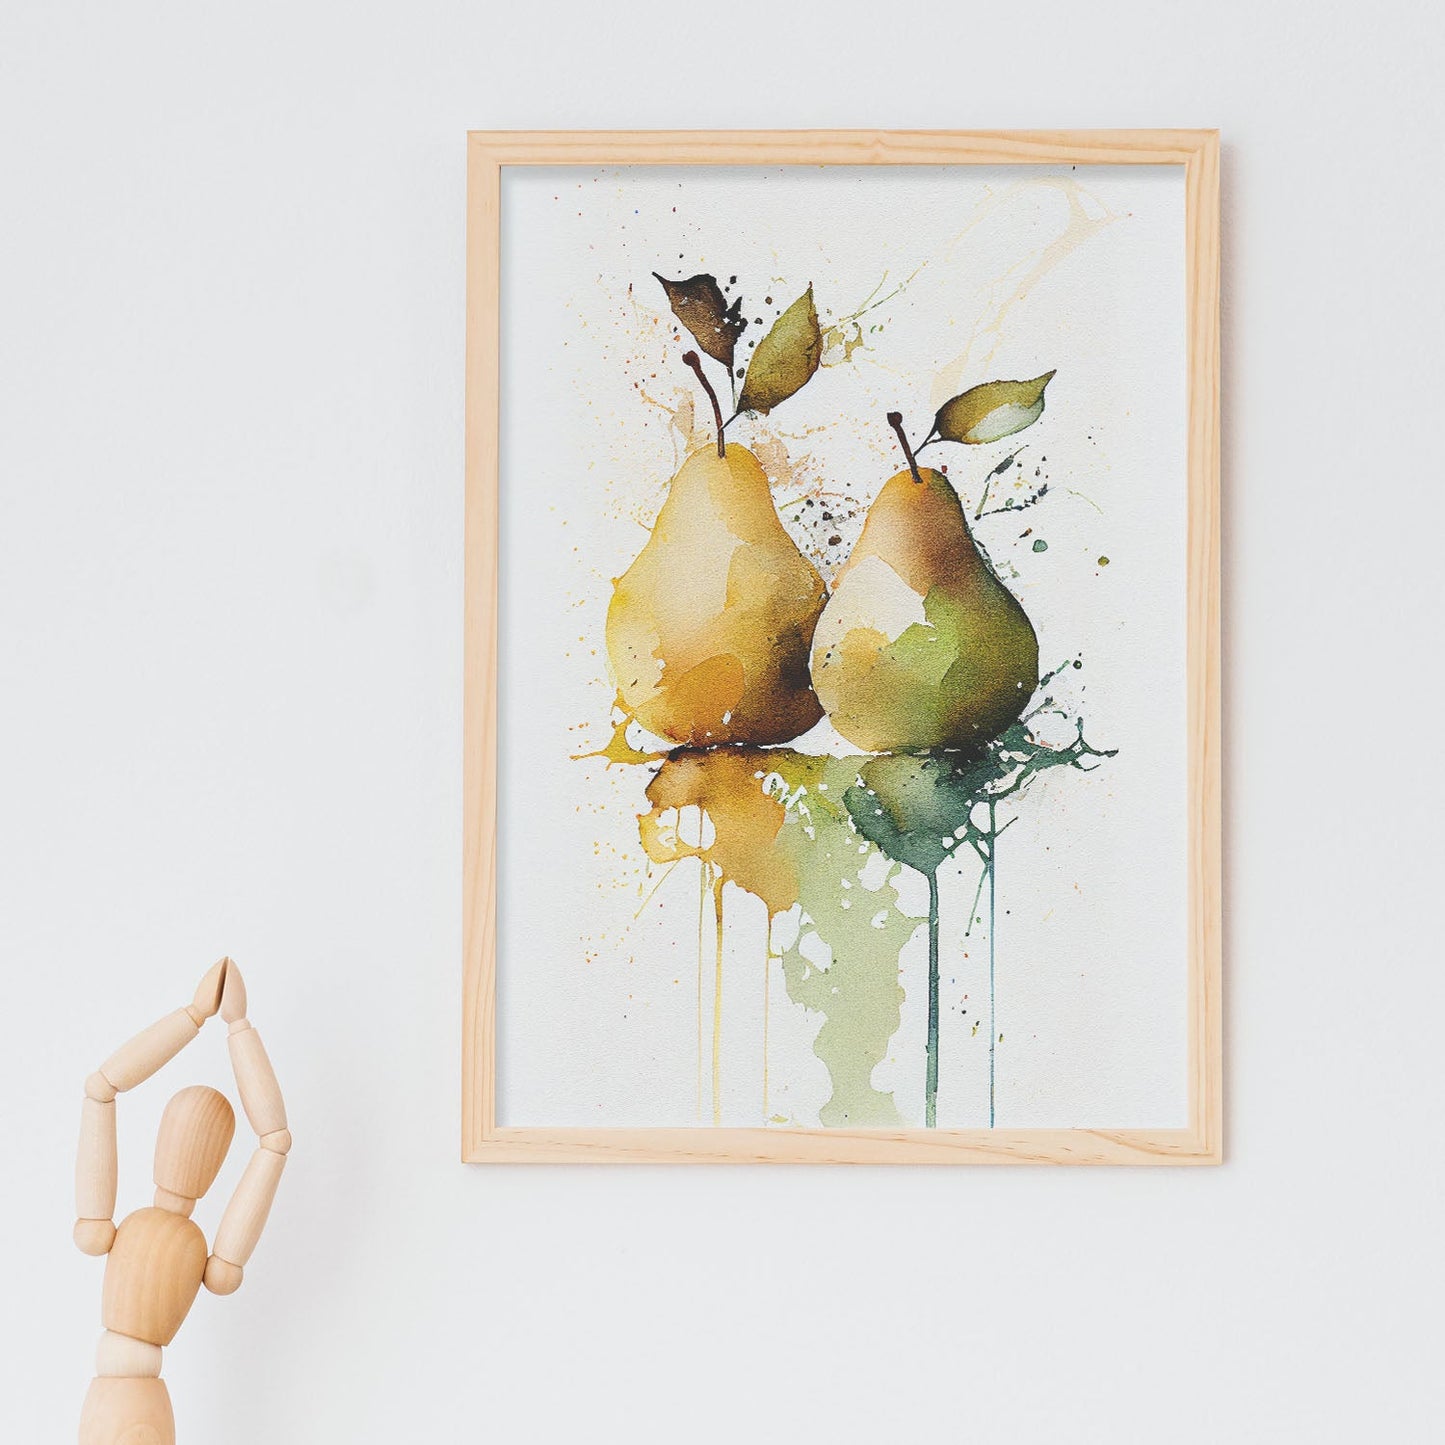 Nacnic minimalist Pears. Aesthetic Wall Art Prints for Bedroom or Living Room Design.